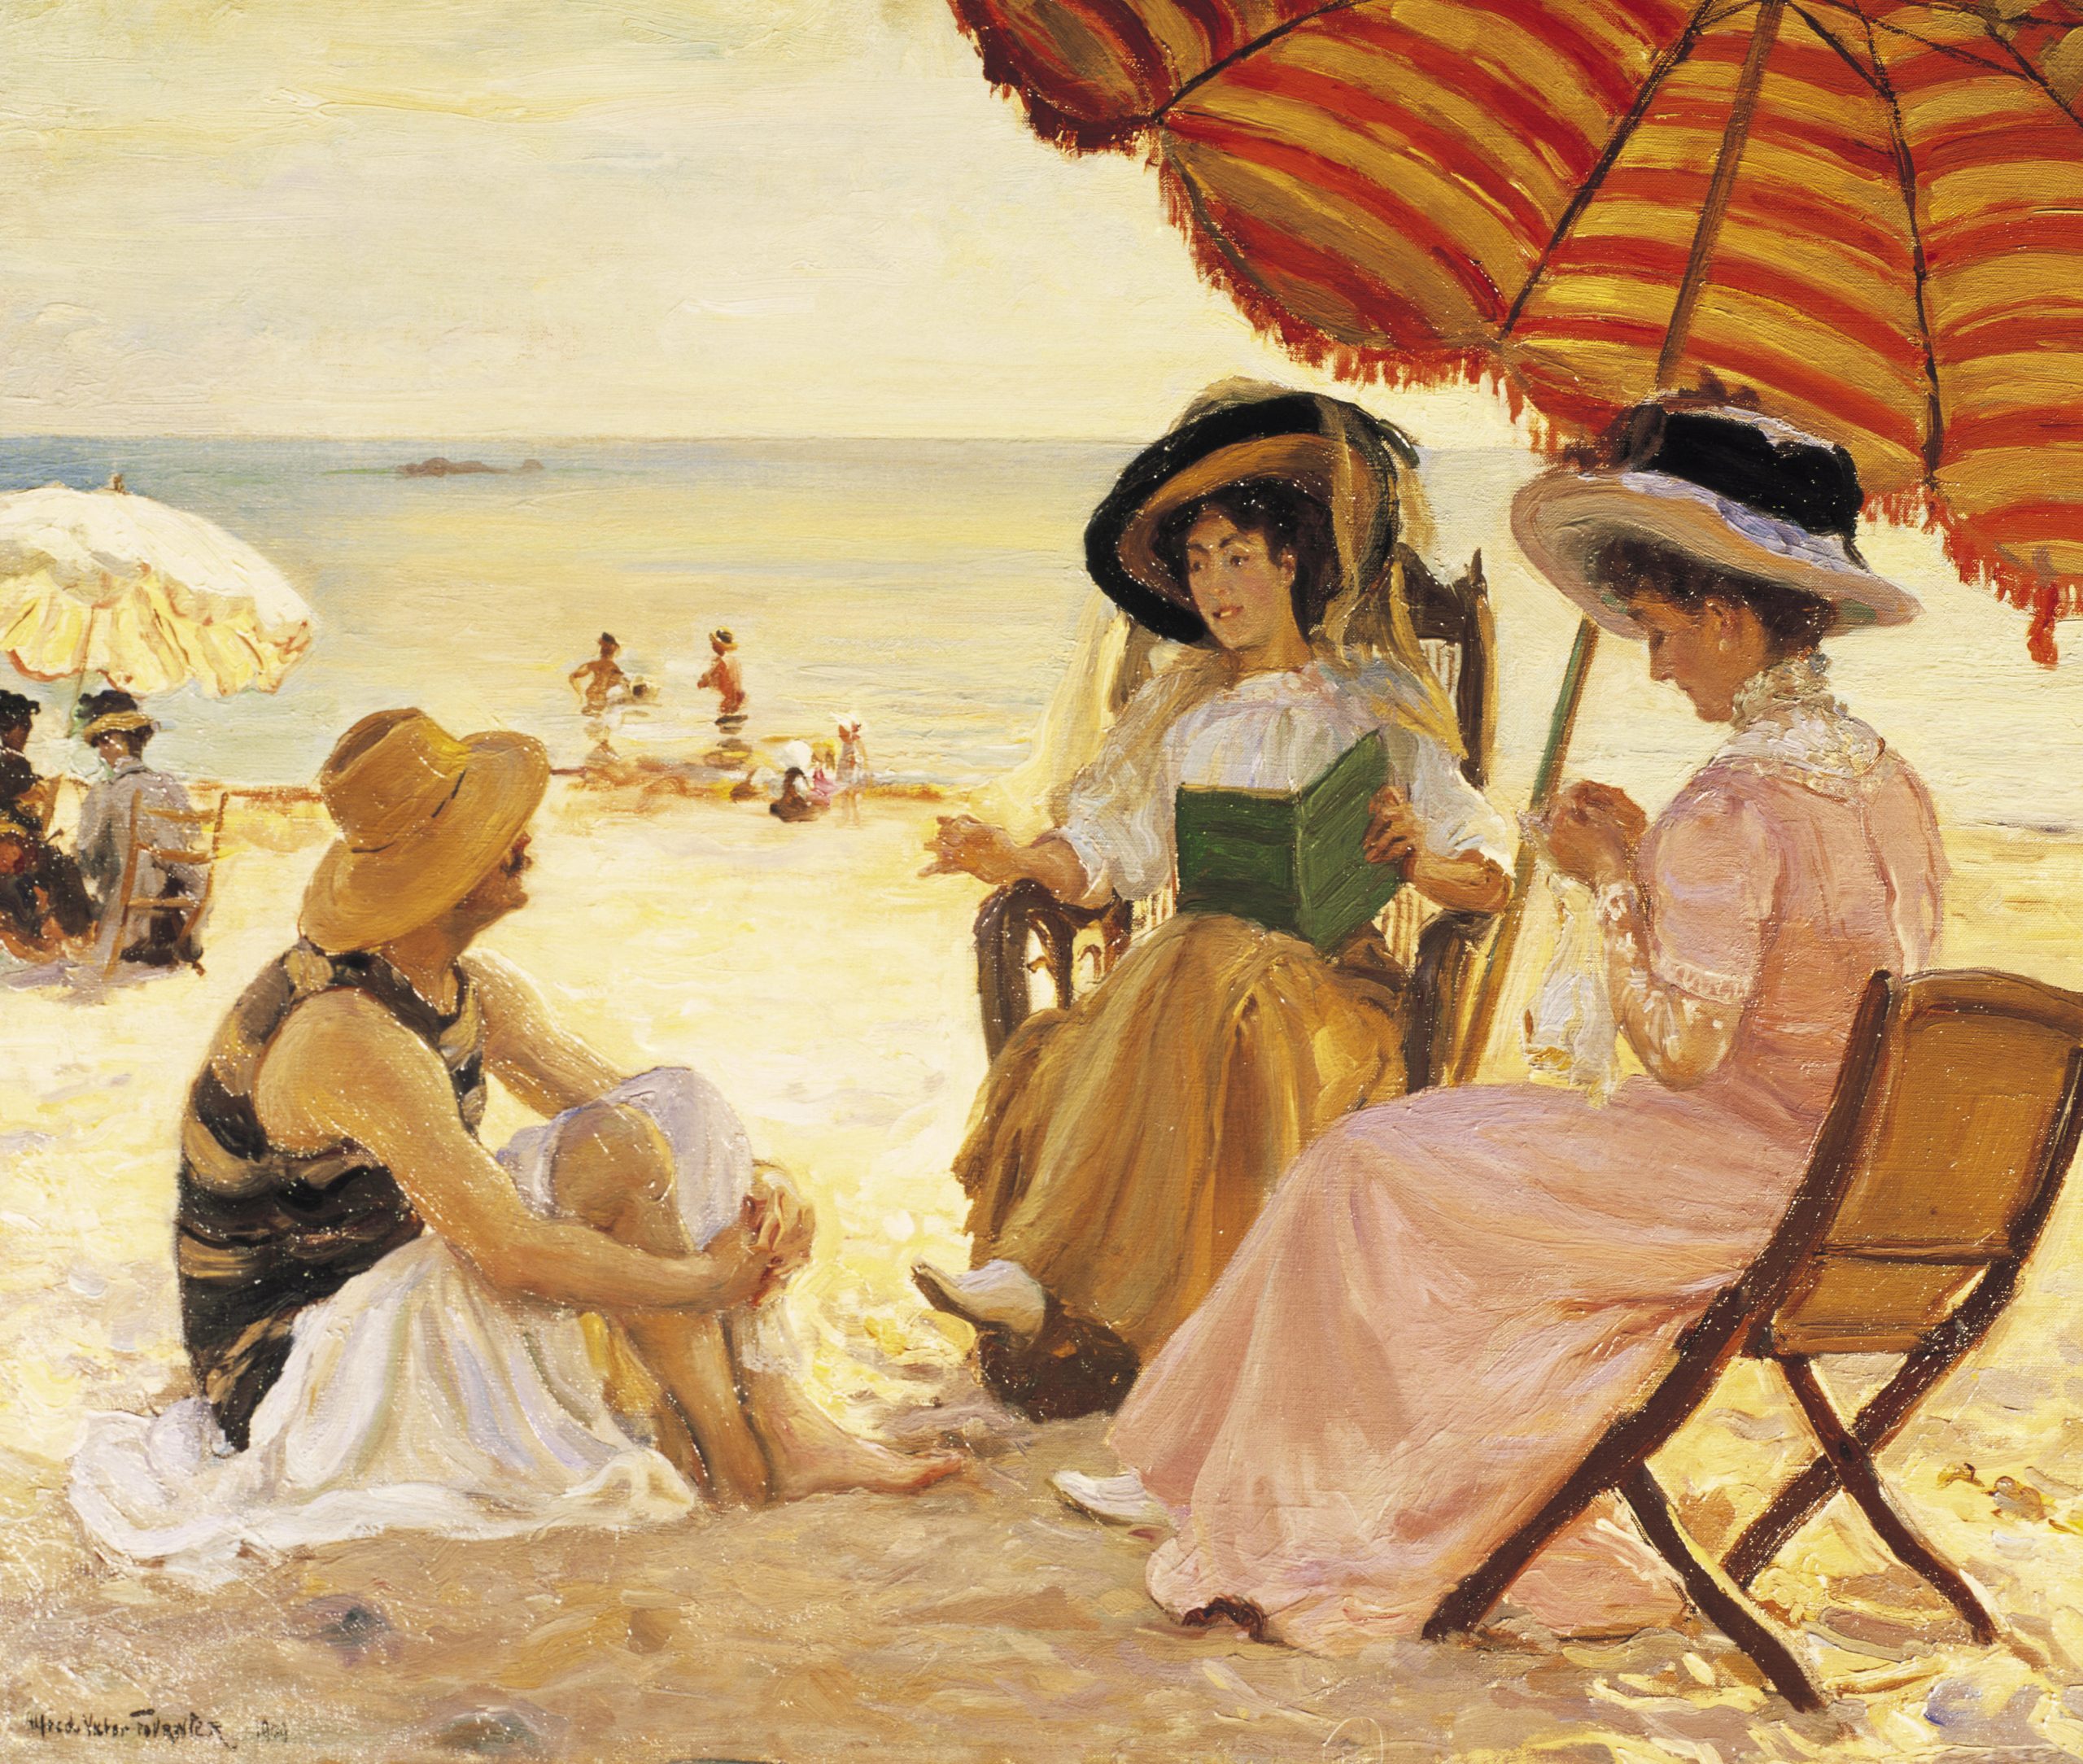 La Plage, from 1900, by artist Alfred-Victor Fournier.